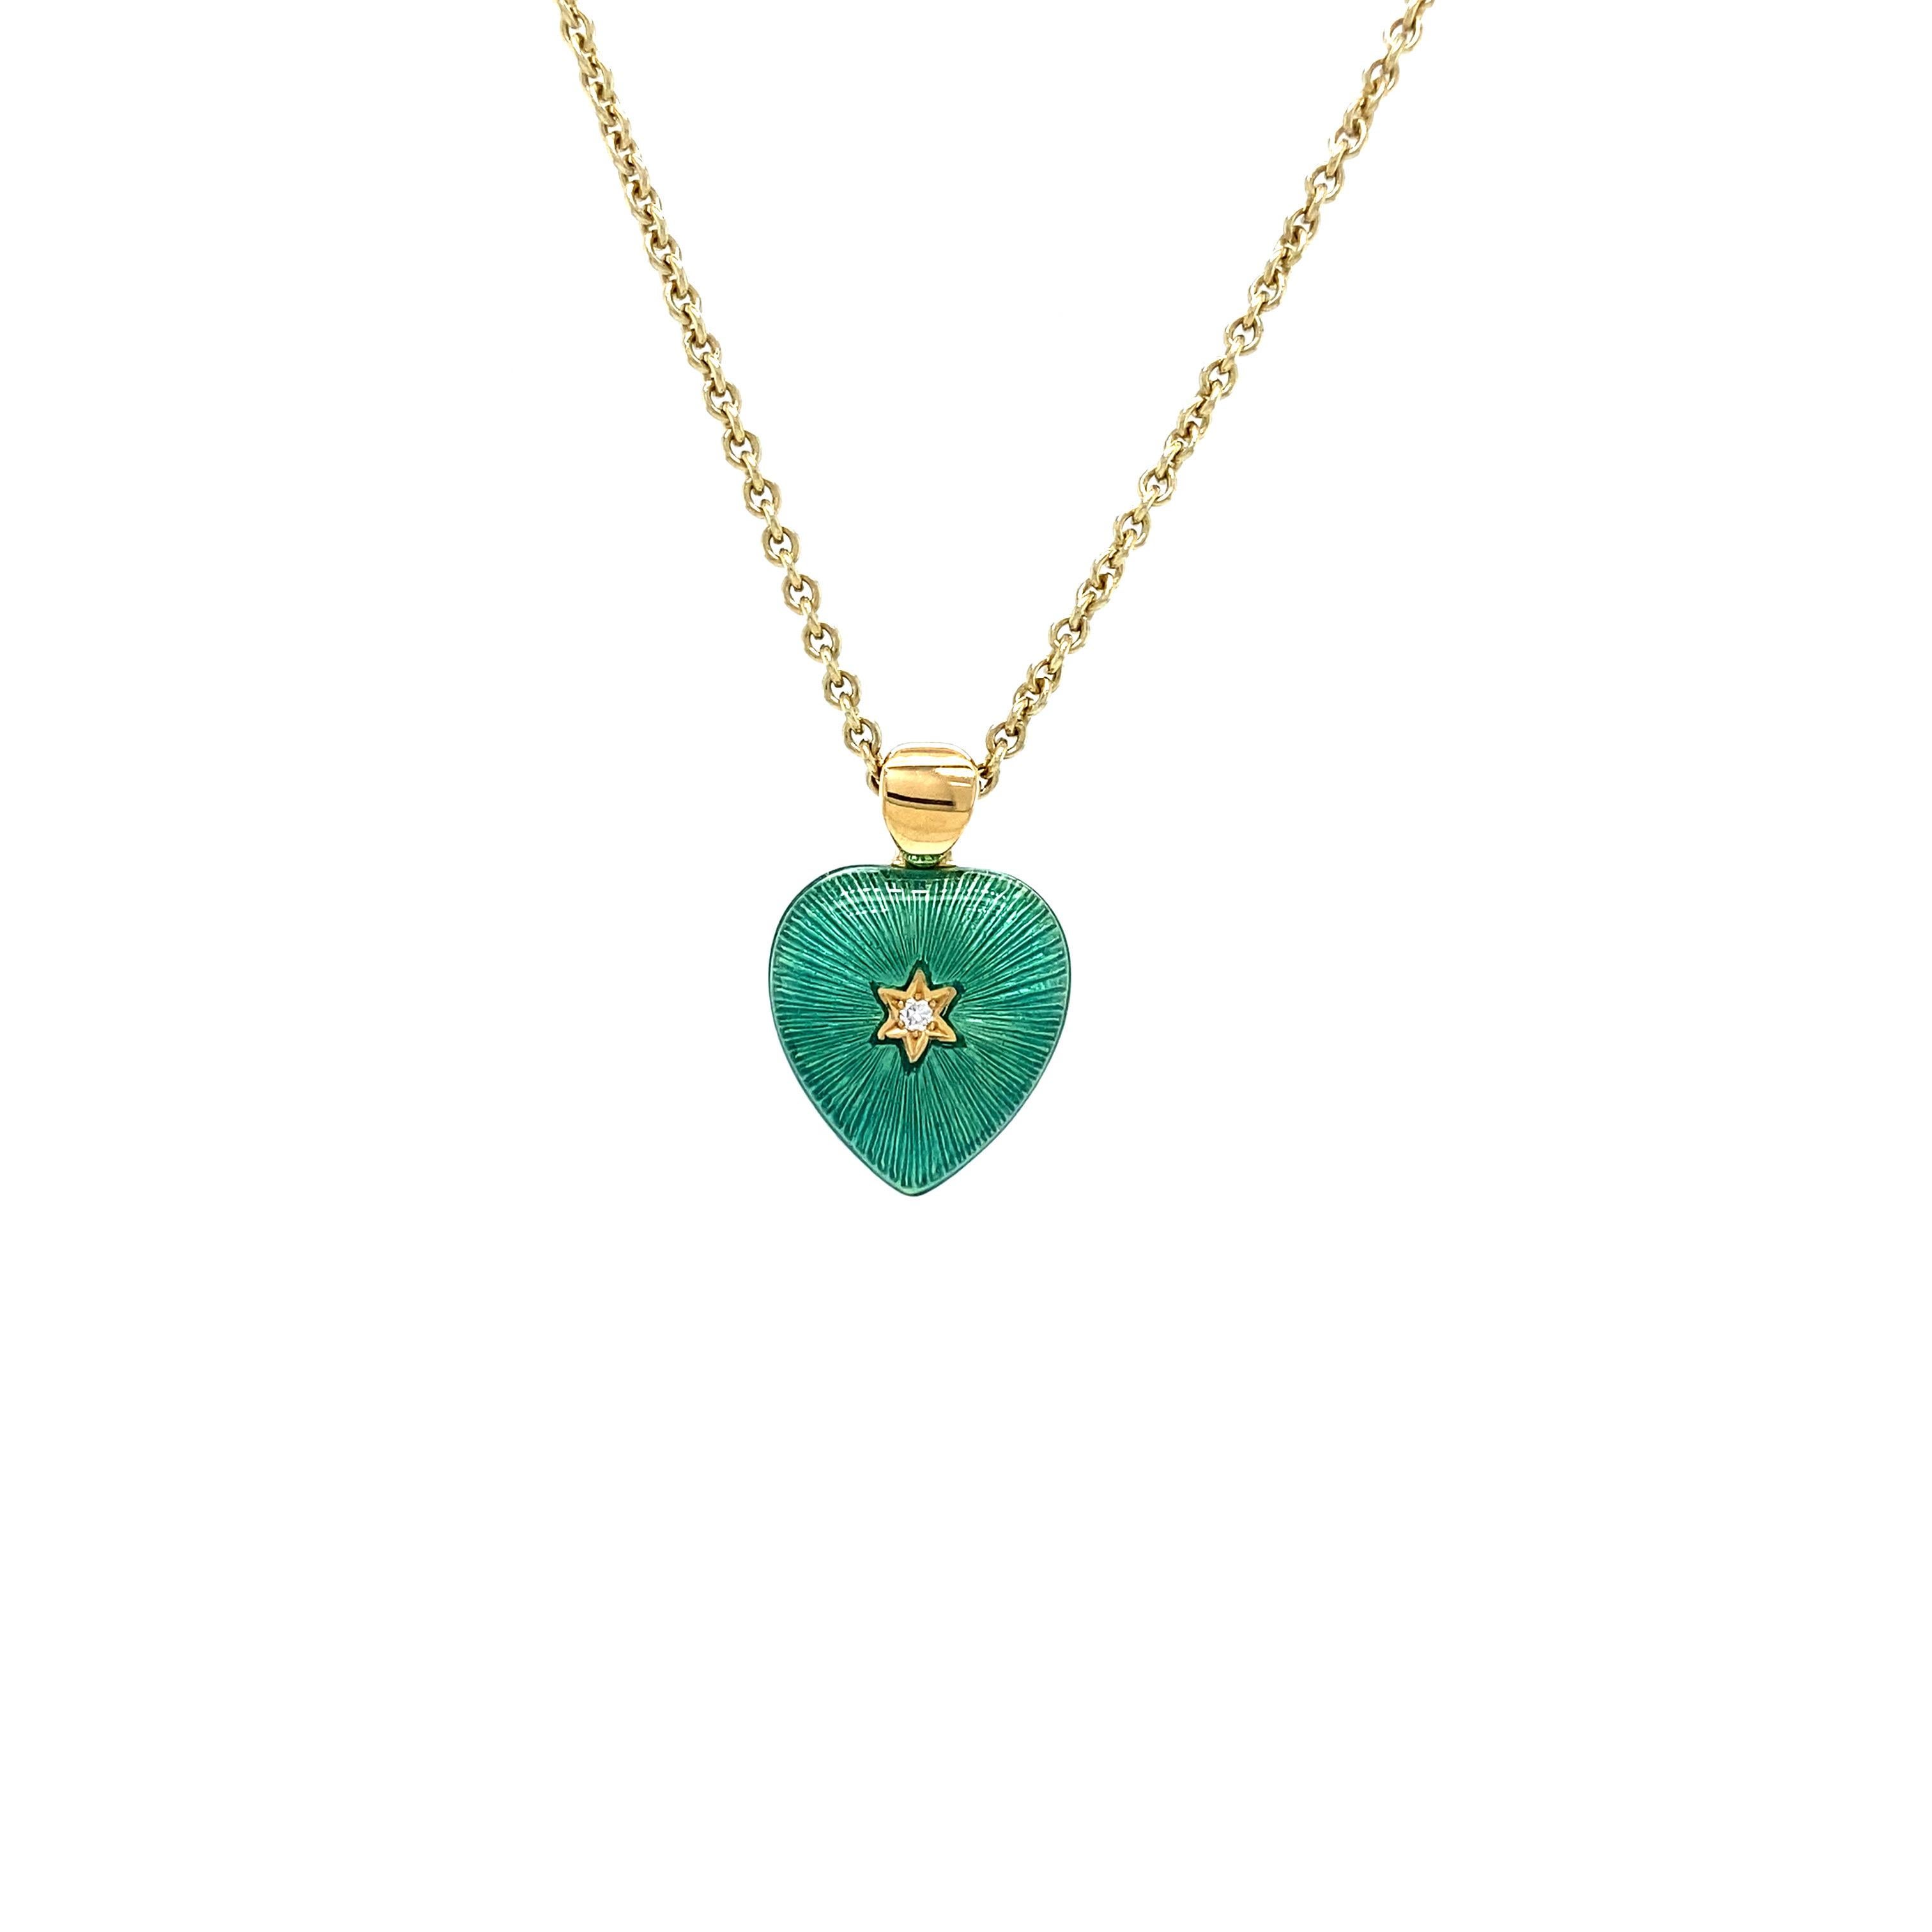 Victor Mayer heart shaped two colored pendant necklace 18k yellow gold, turquoise and dark green vitreous enamel, 2 diamonds, total 2.02 ct, G VS, measurements app. 11.8 mm x 13.0 mm

About the creator Victor Mayer
Victor Mayer is internationally